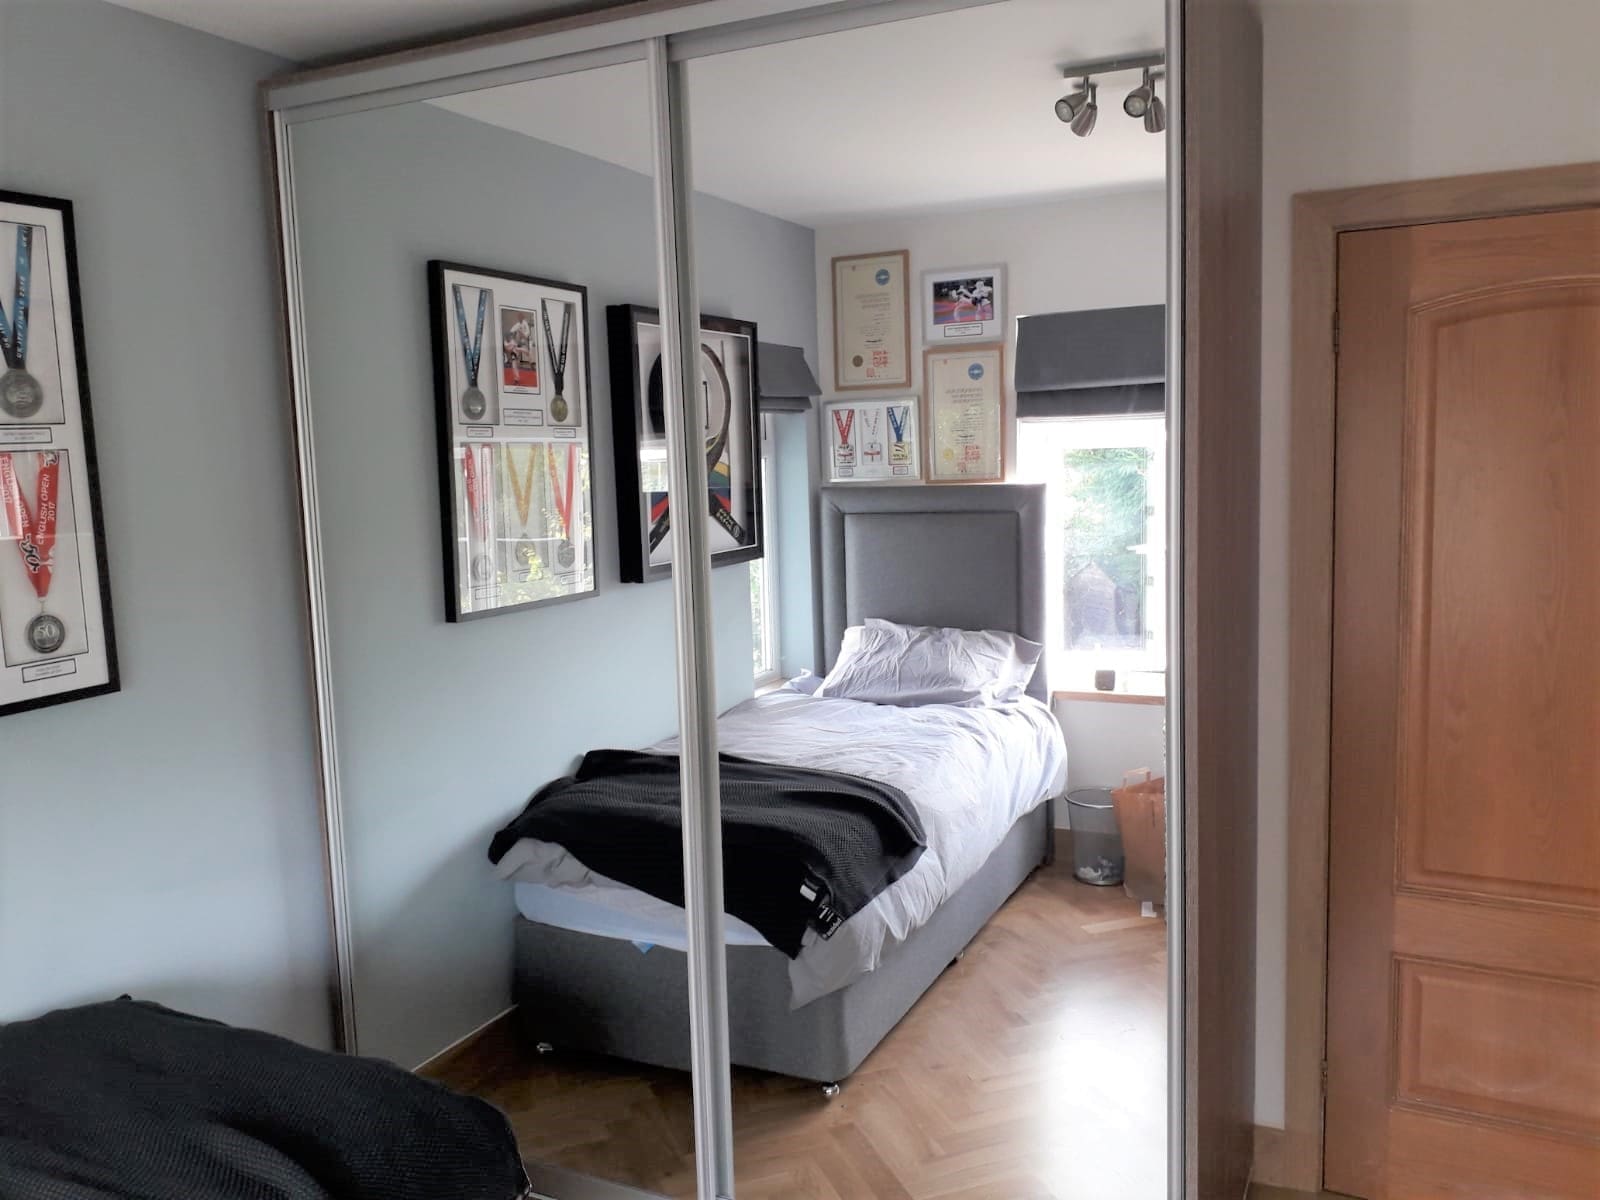 Single bedroom mirrored fitted wardrobe